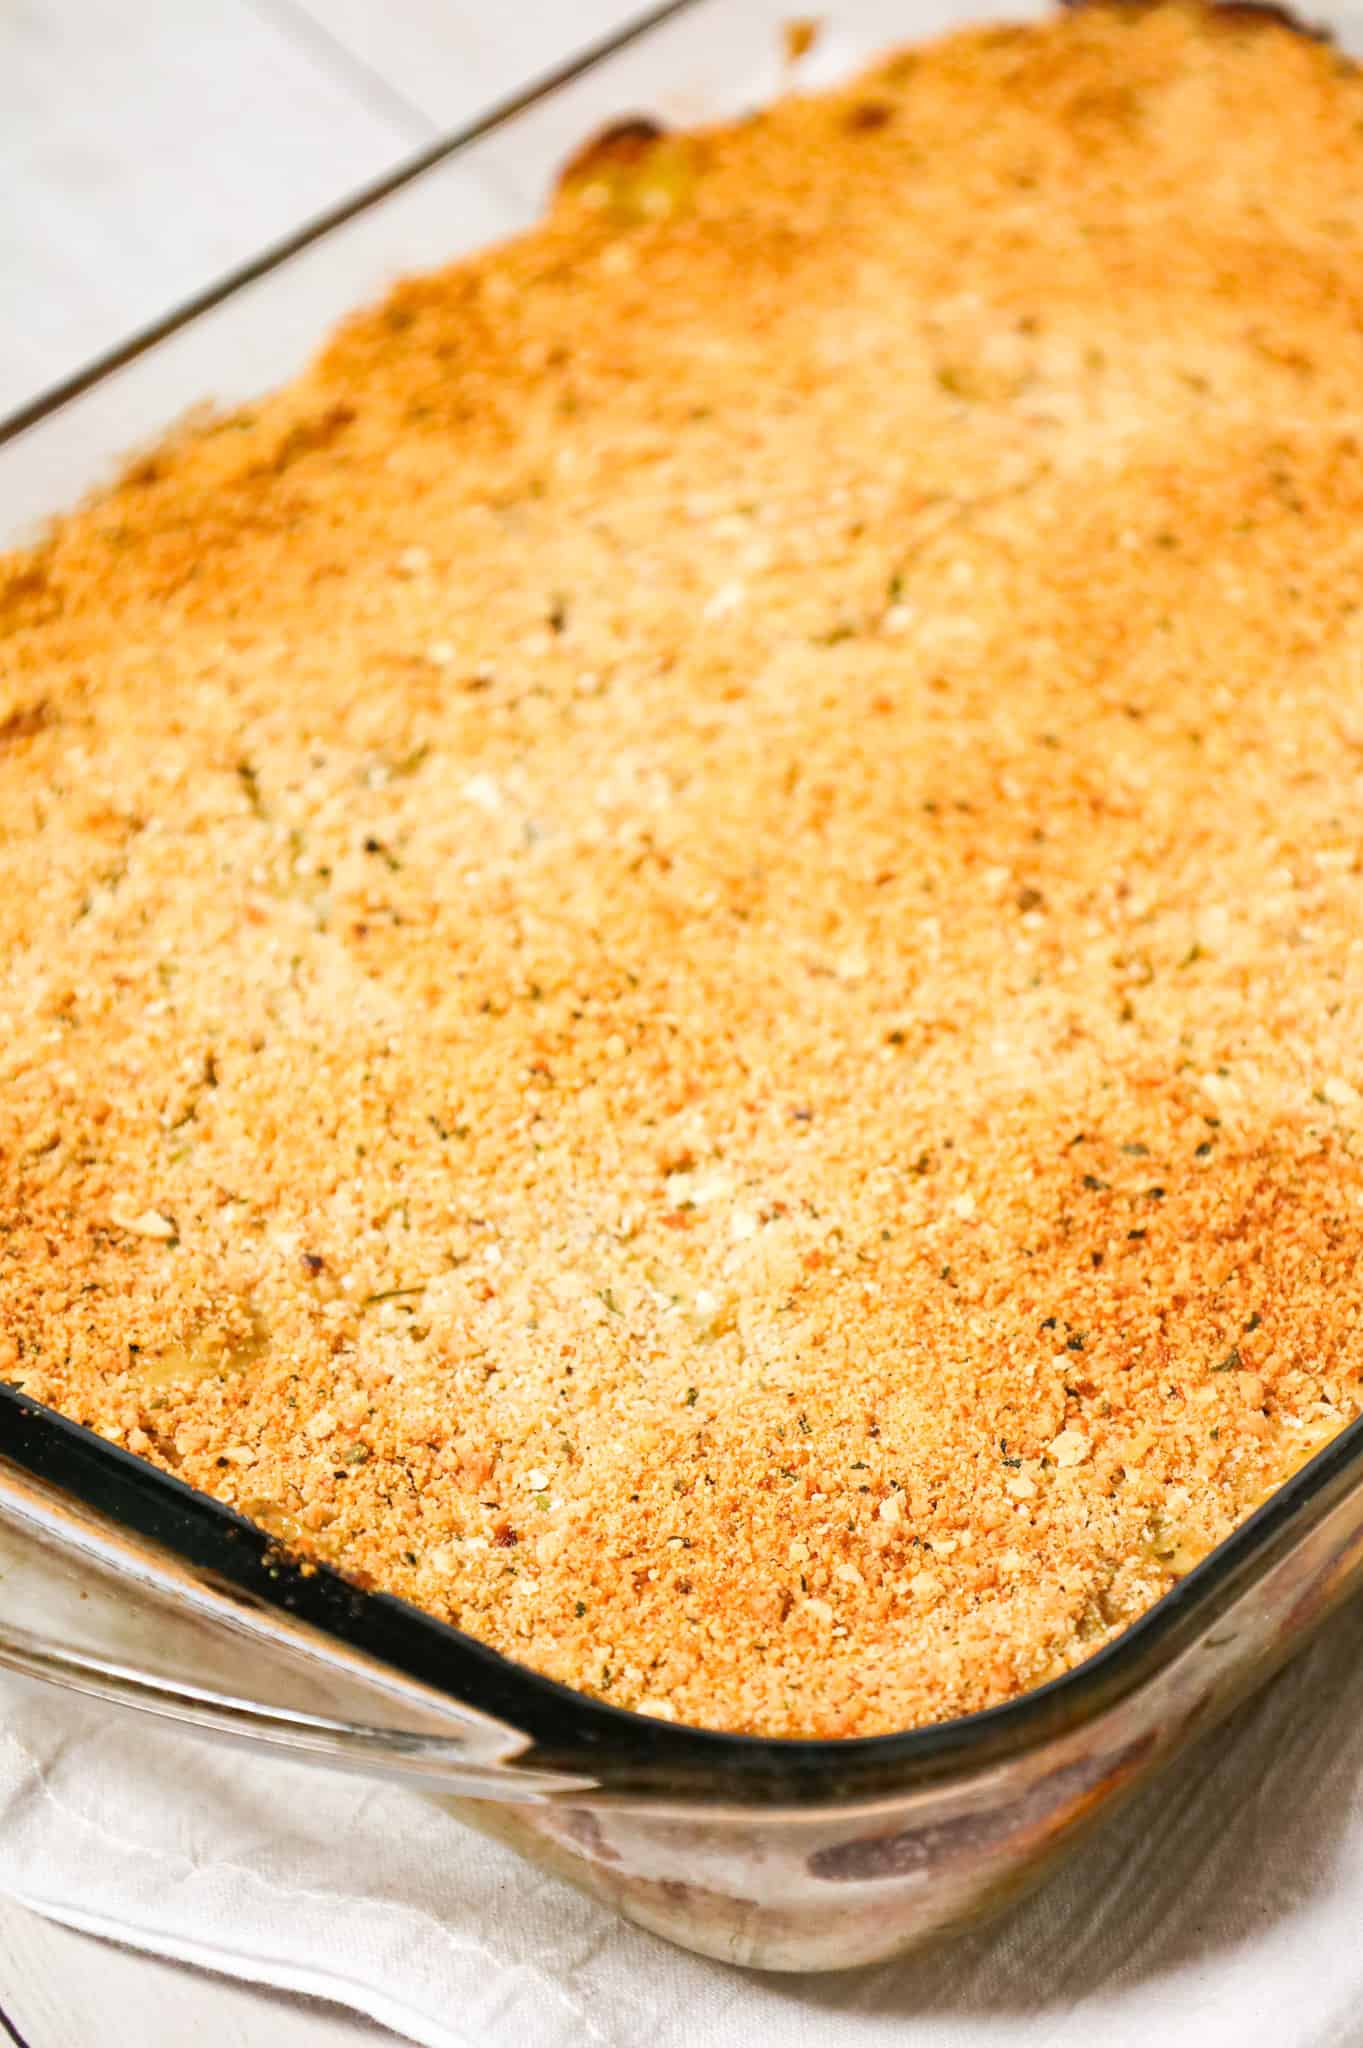 Old School Chicken and Rice Casserole is an easy dinner recipe using shredded rotisserie chicken, three flavours of cream soups, instant rice, green onions, parmesan cheese and bread crumbs.